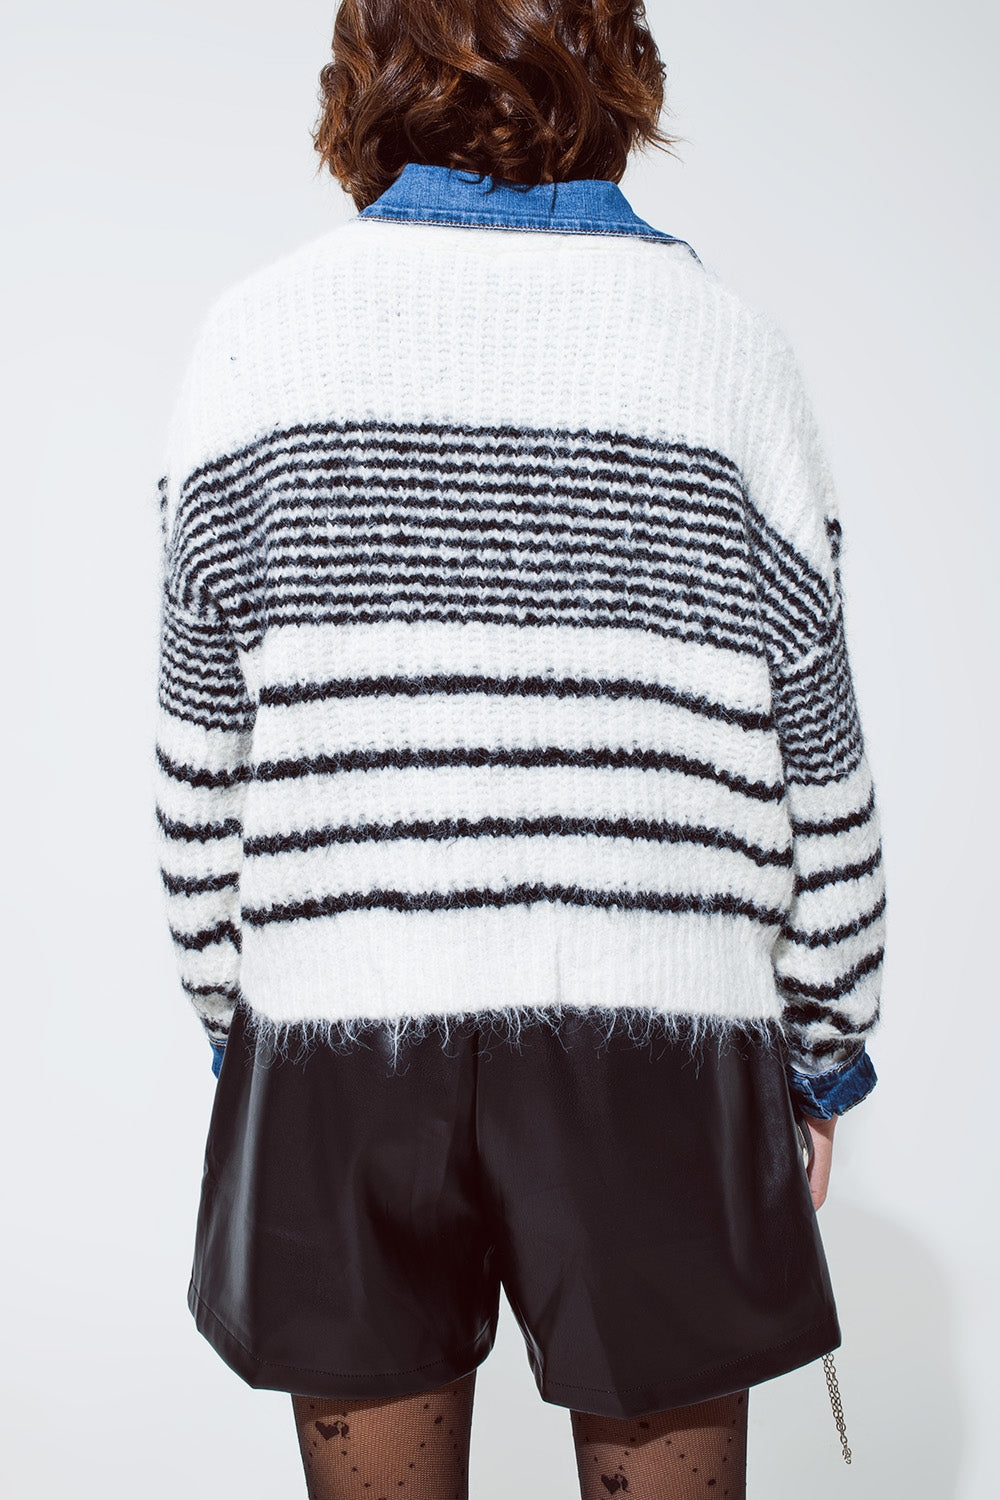 Soft and Fluffy White Cardigan With Black Stripes And Deep V neck